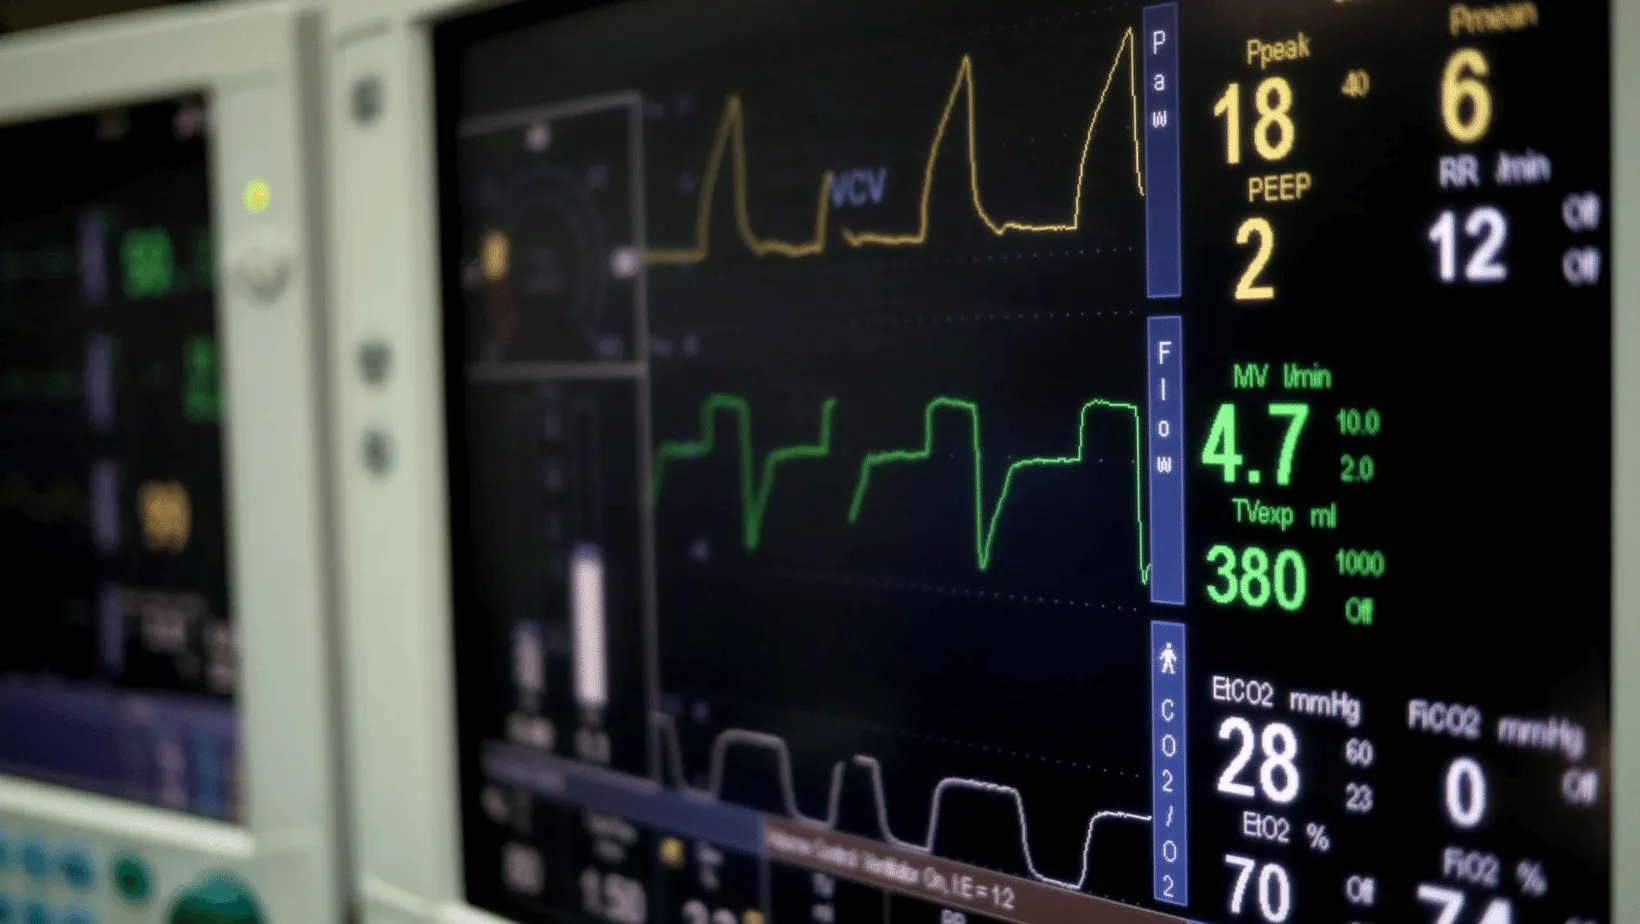 Close-up of a medical ventilator's monitor displaying various critical respiratory parameters and waveforms, such as pressure, flow, and carbon dioxide levels.